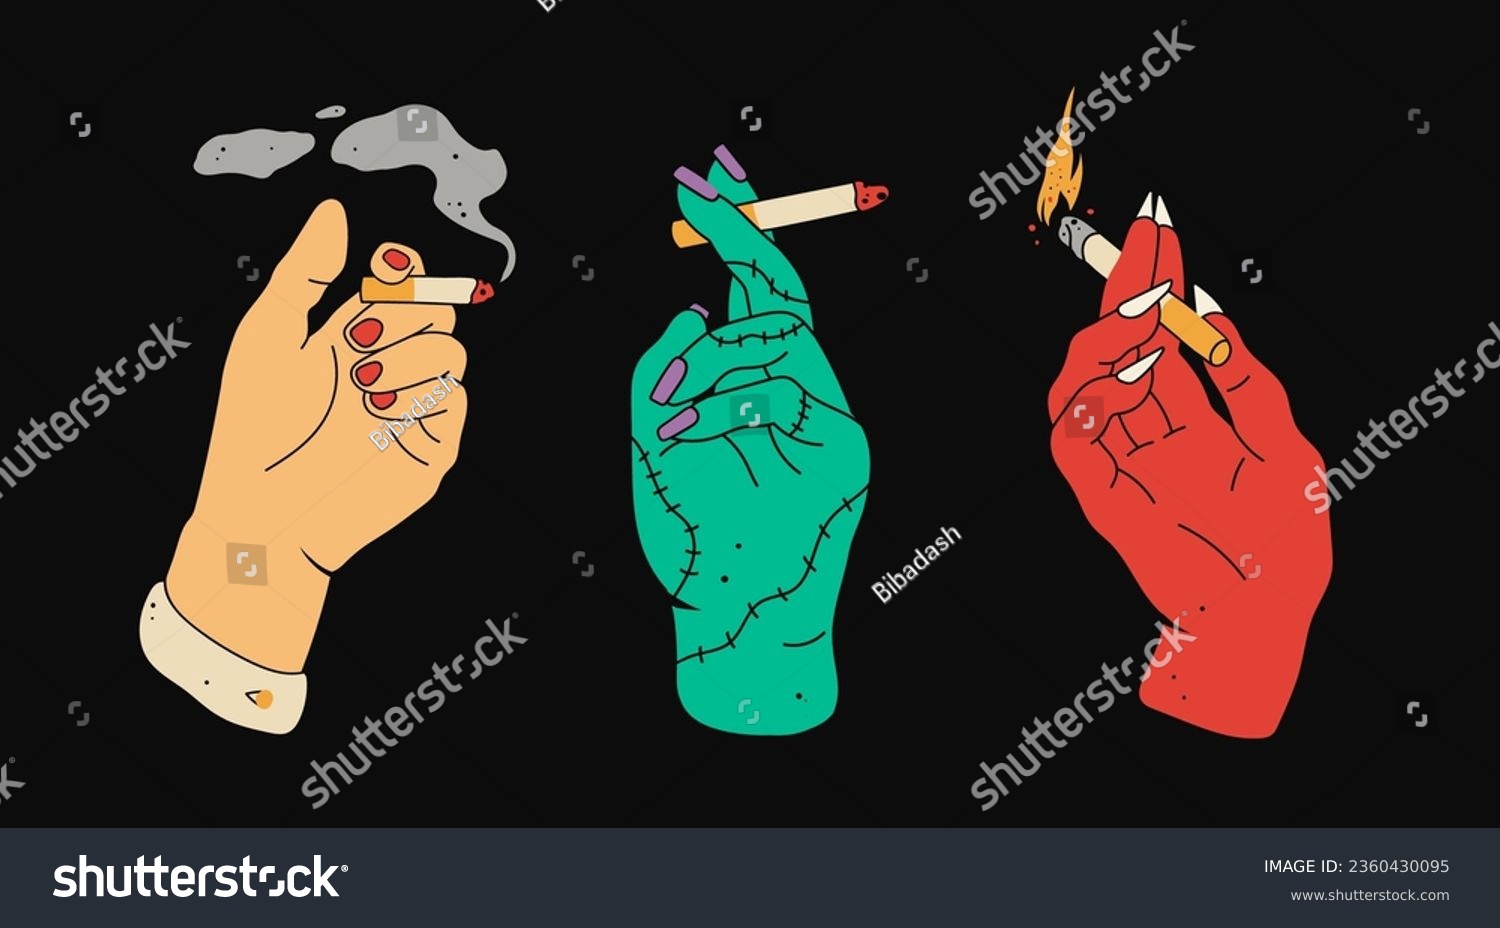 SVG of Human, zombie, demon or satan hand holding cigarettes. Hand drawn modern Vector illustration. Halloween, smoking concept. Poster, print, design templates, tattoo idea. Every hand is isolated svg